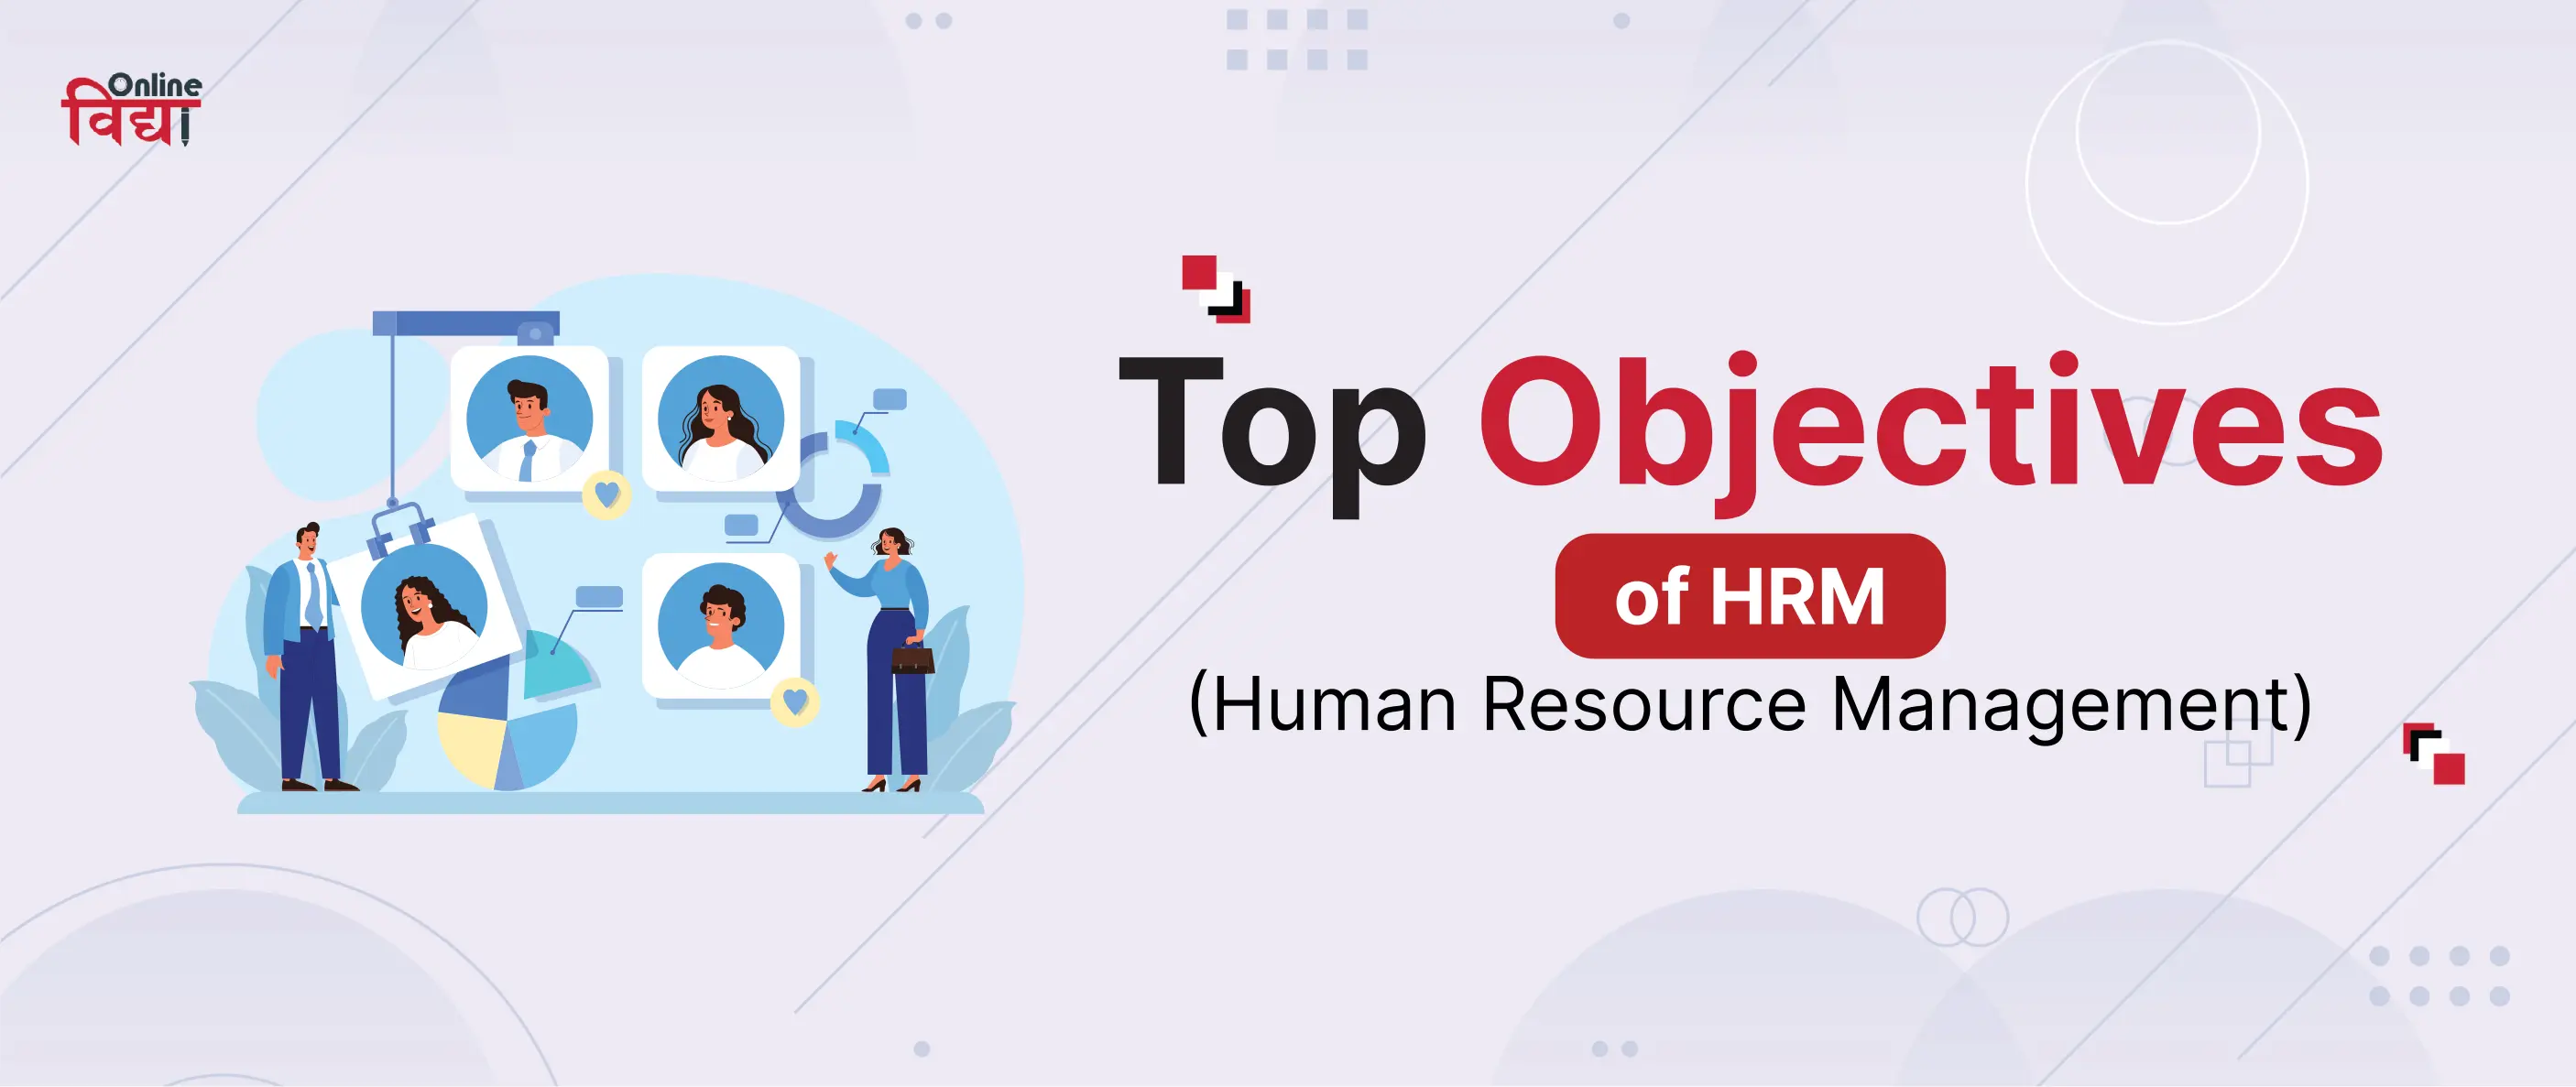 Top Objectives of HRM (Human Resource Management)